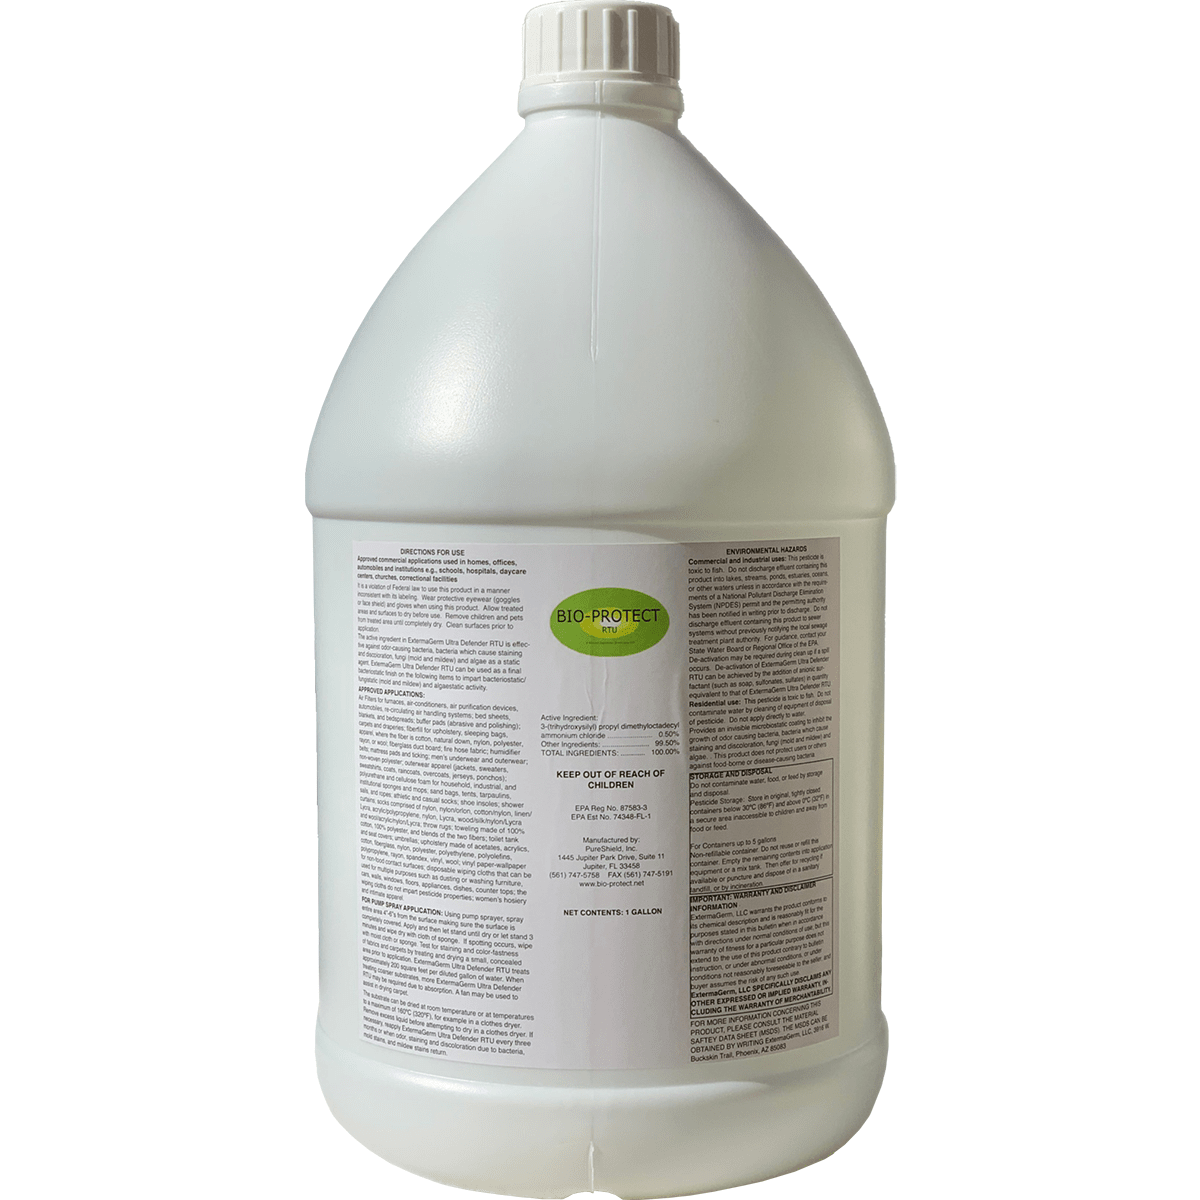 Microbe Free Solutions Bio-Protect Antimicrobial Surface Protectant - 1 Gallon